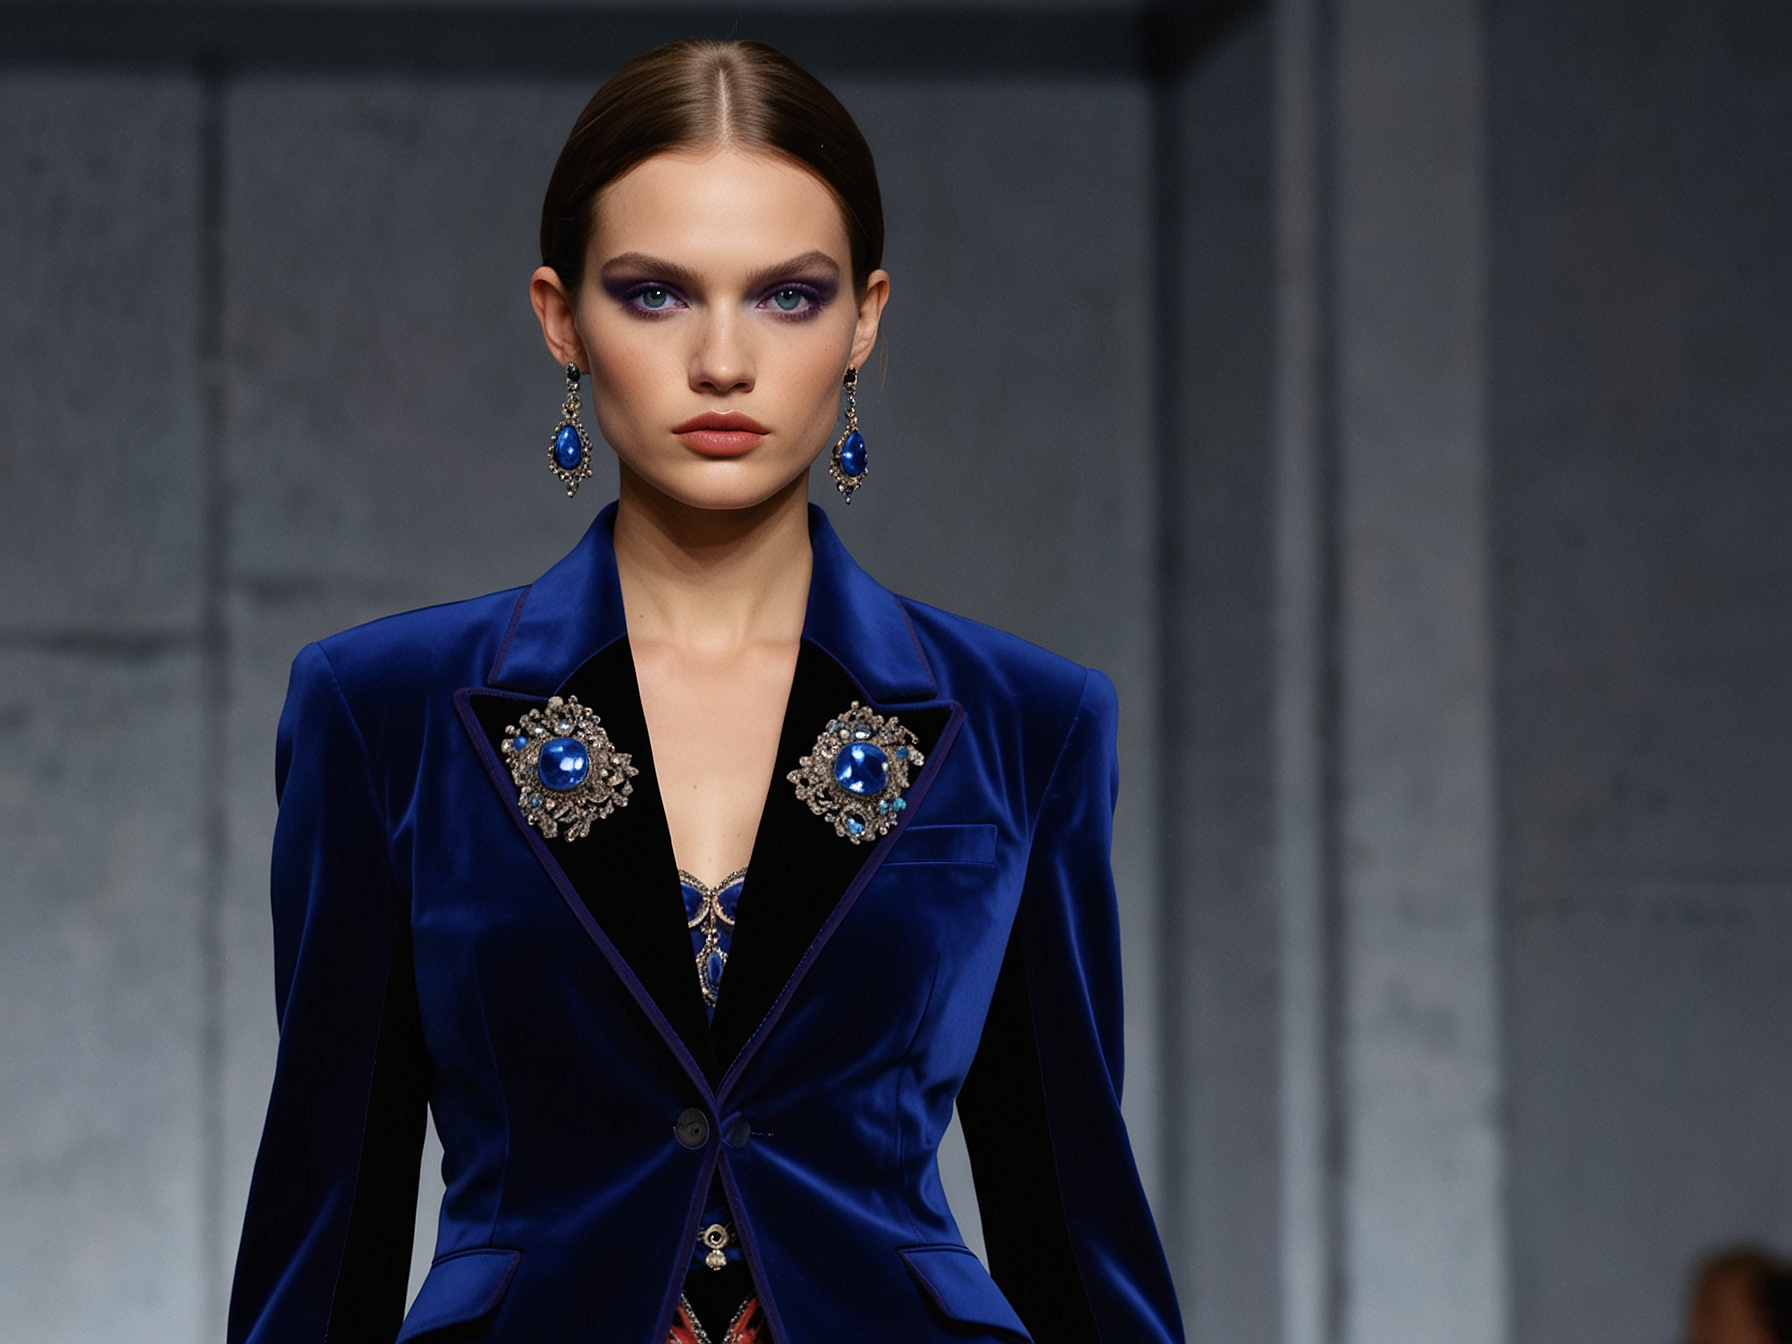 A model struts down the Milan Fashion Week runway in a structured blazer made of deep purple velvet, highlighted by intricate gemstone accessories and bold, electric blue makeup.